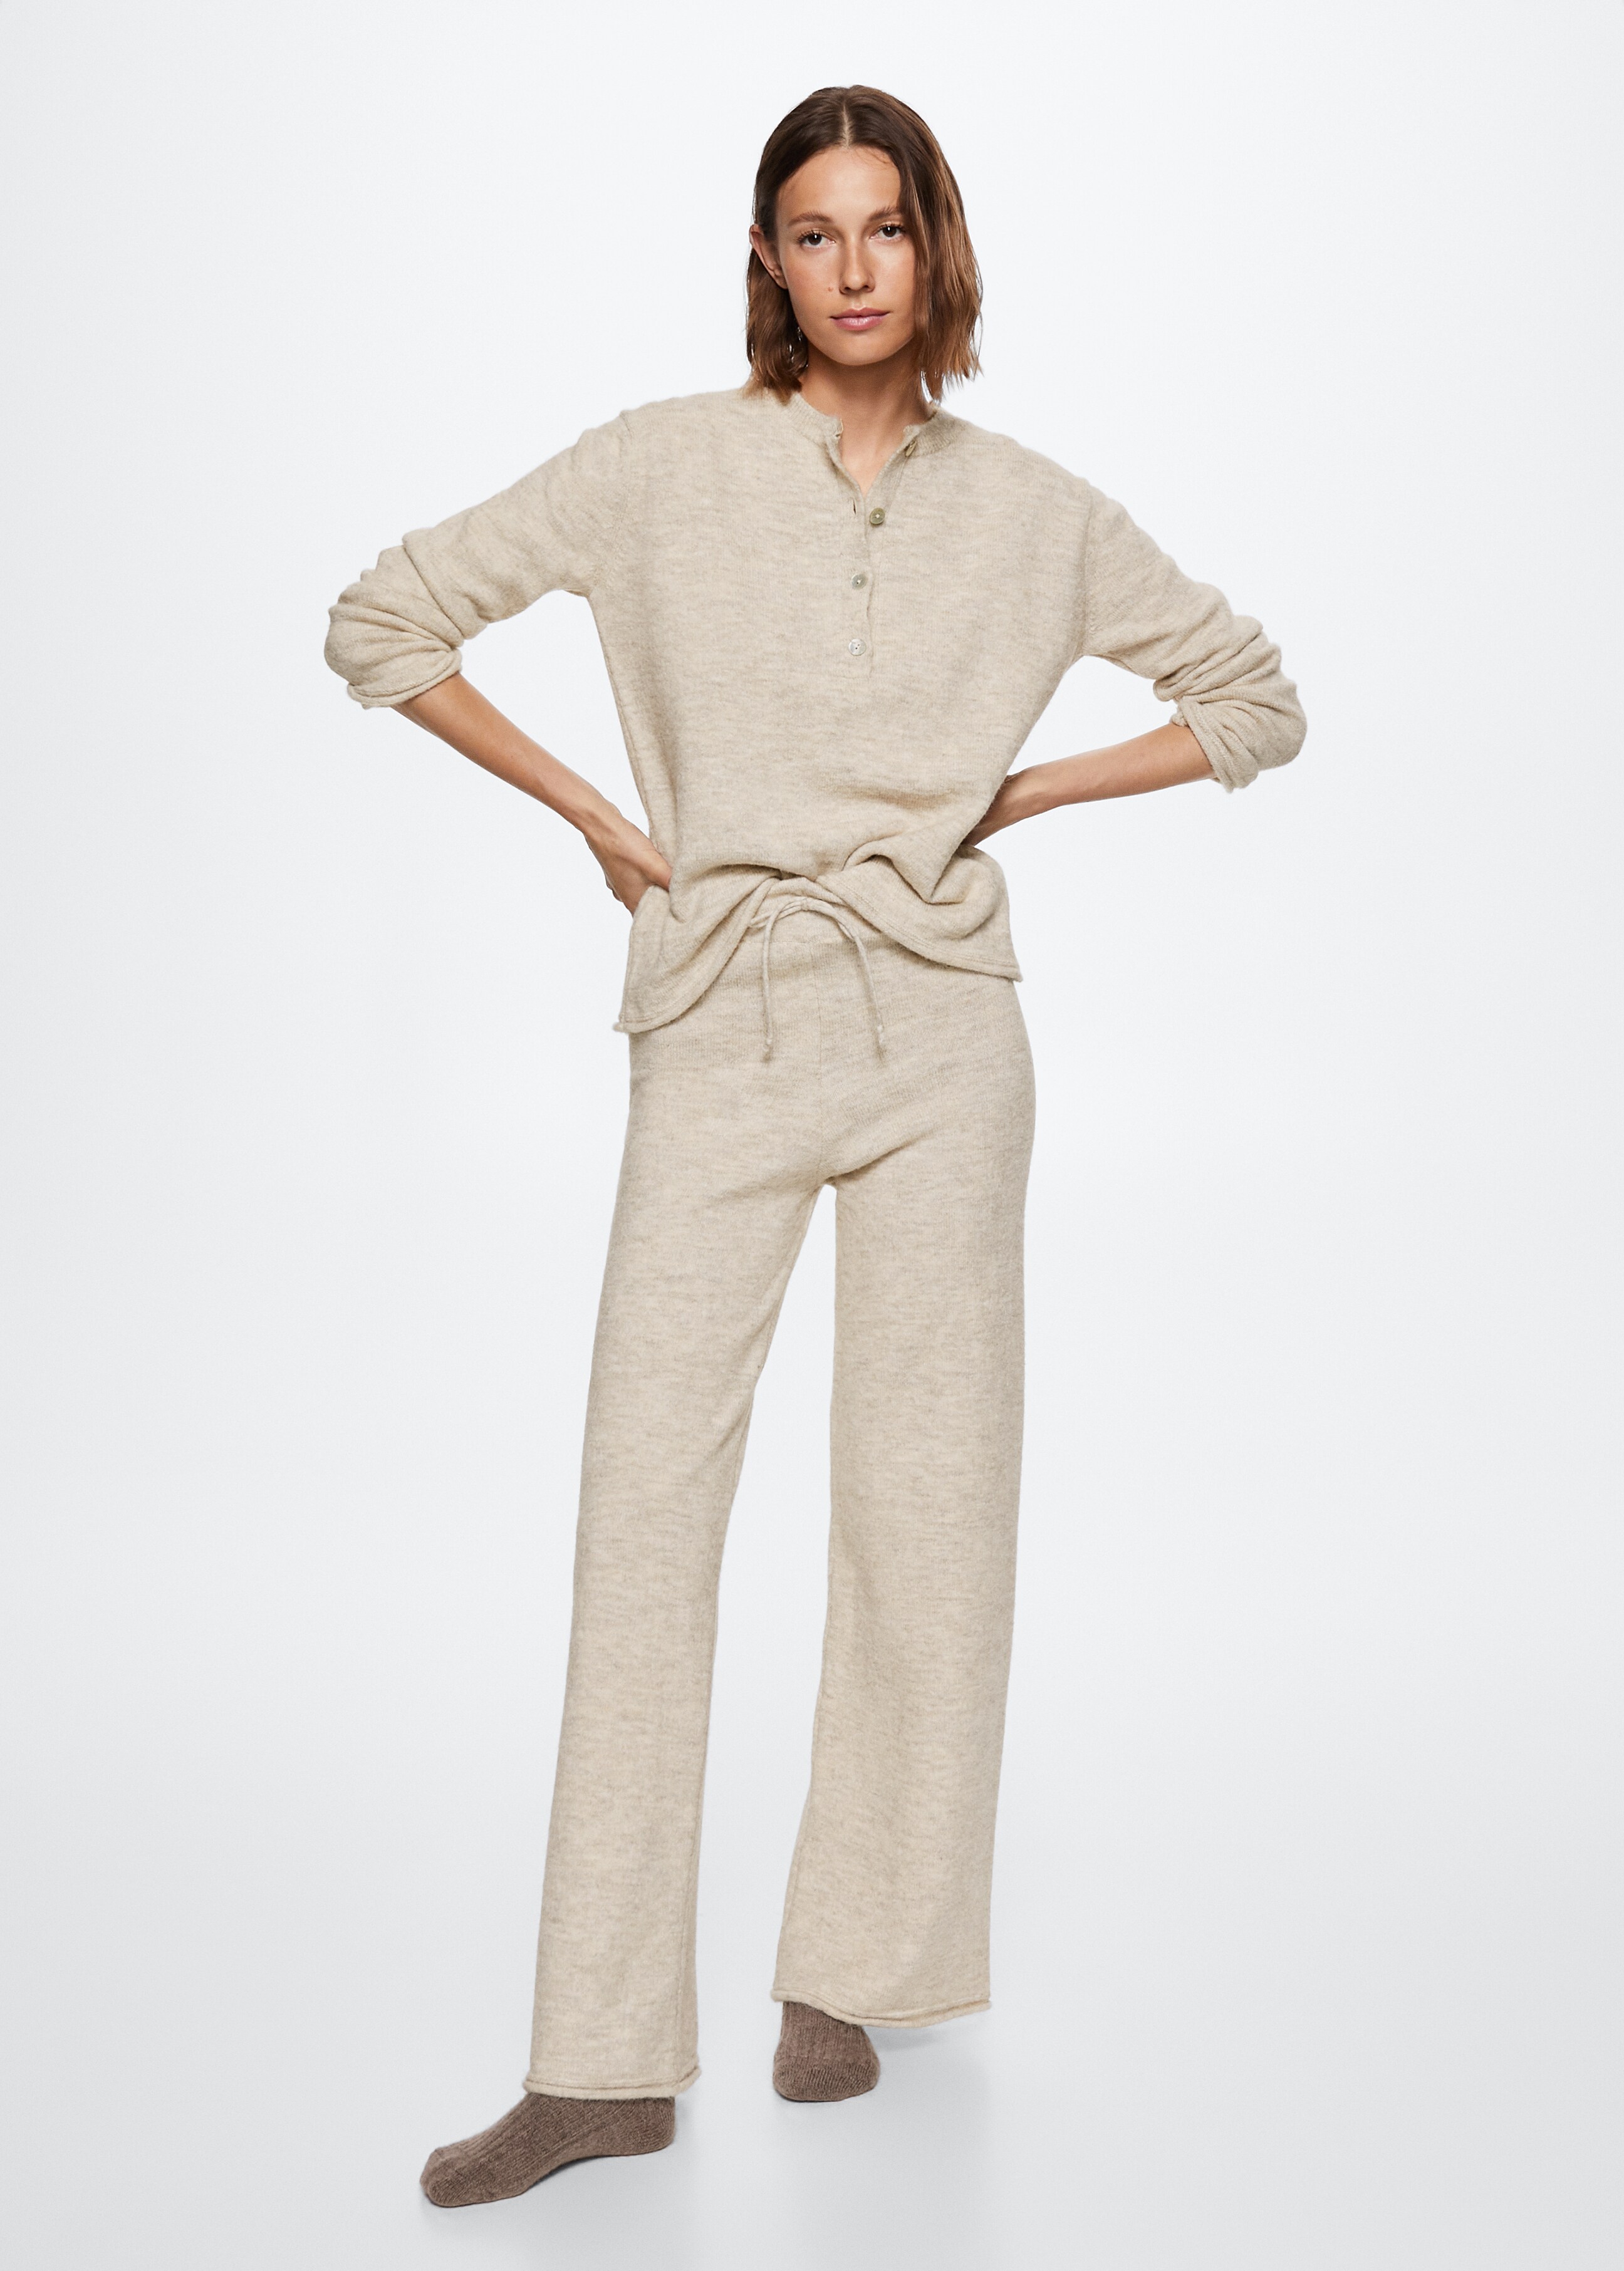 Knitted pyjama trousers - General plane